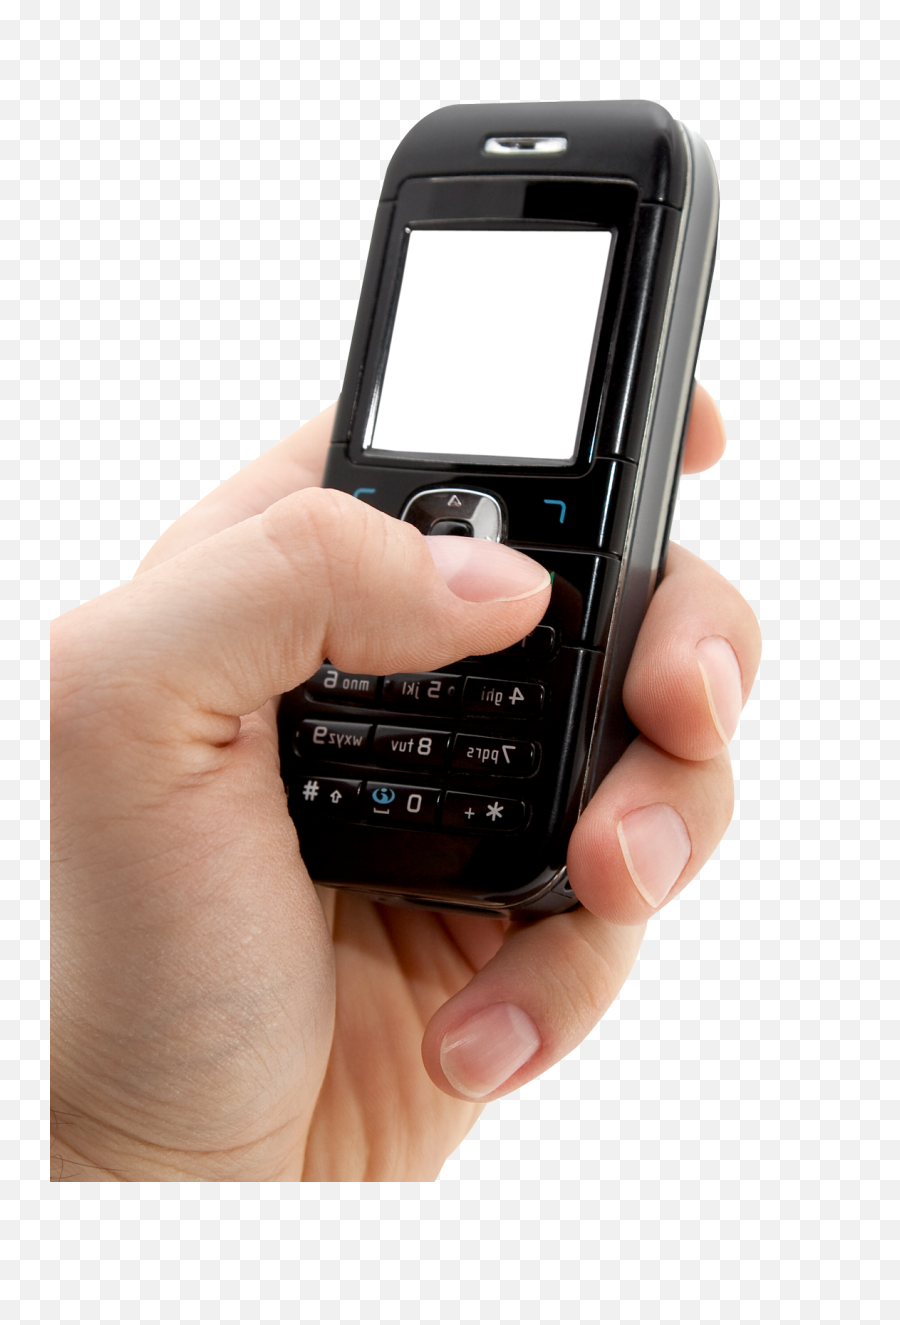 Download Mobile Phone In Hand Png Image - Analog Mobile Phone With Hand,Phone In Hand Png